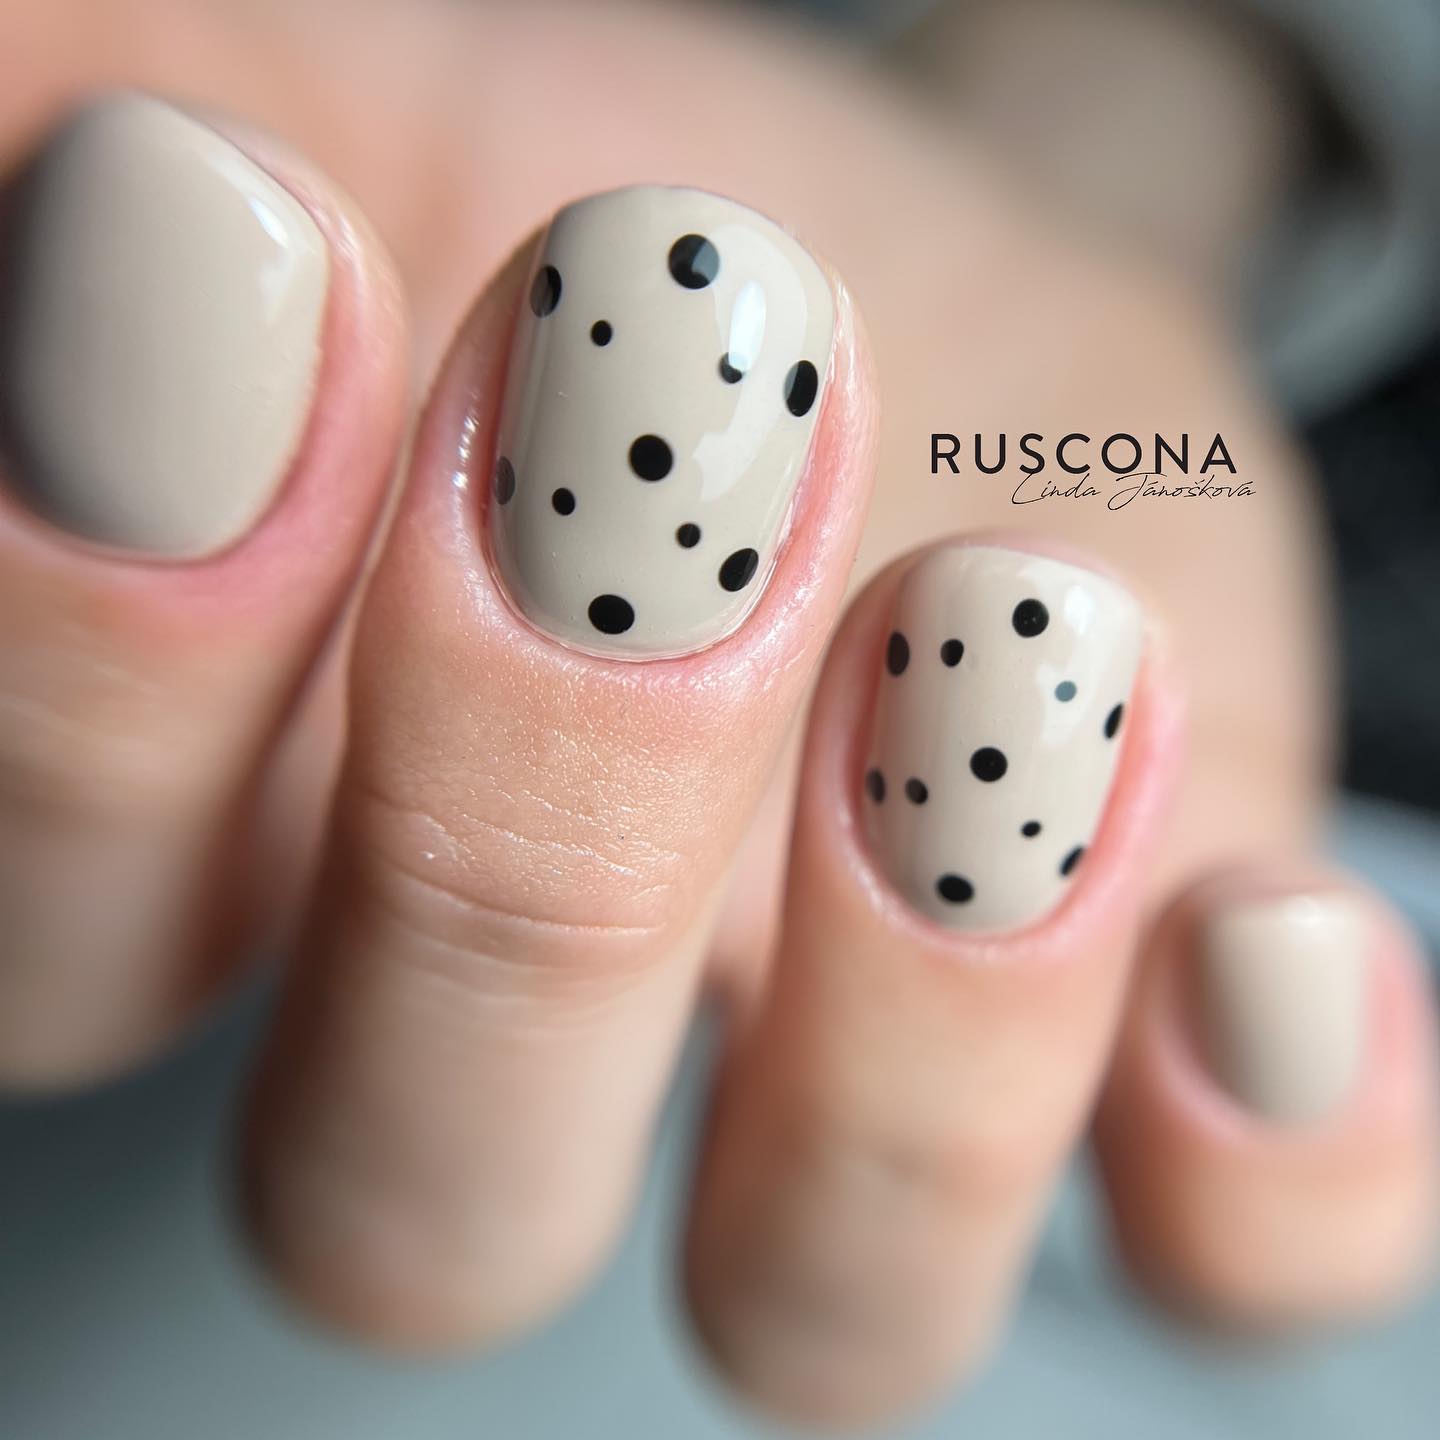 Dots nails are when you put little dots on your nail. They're really fun, and they make your nails look really cute!